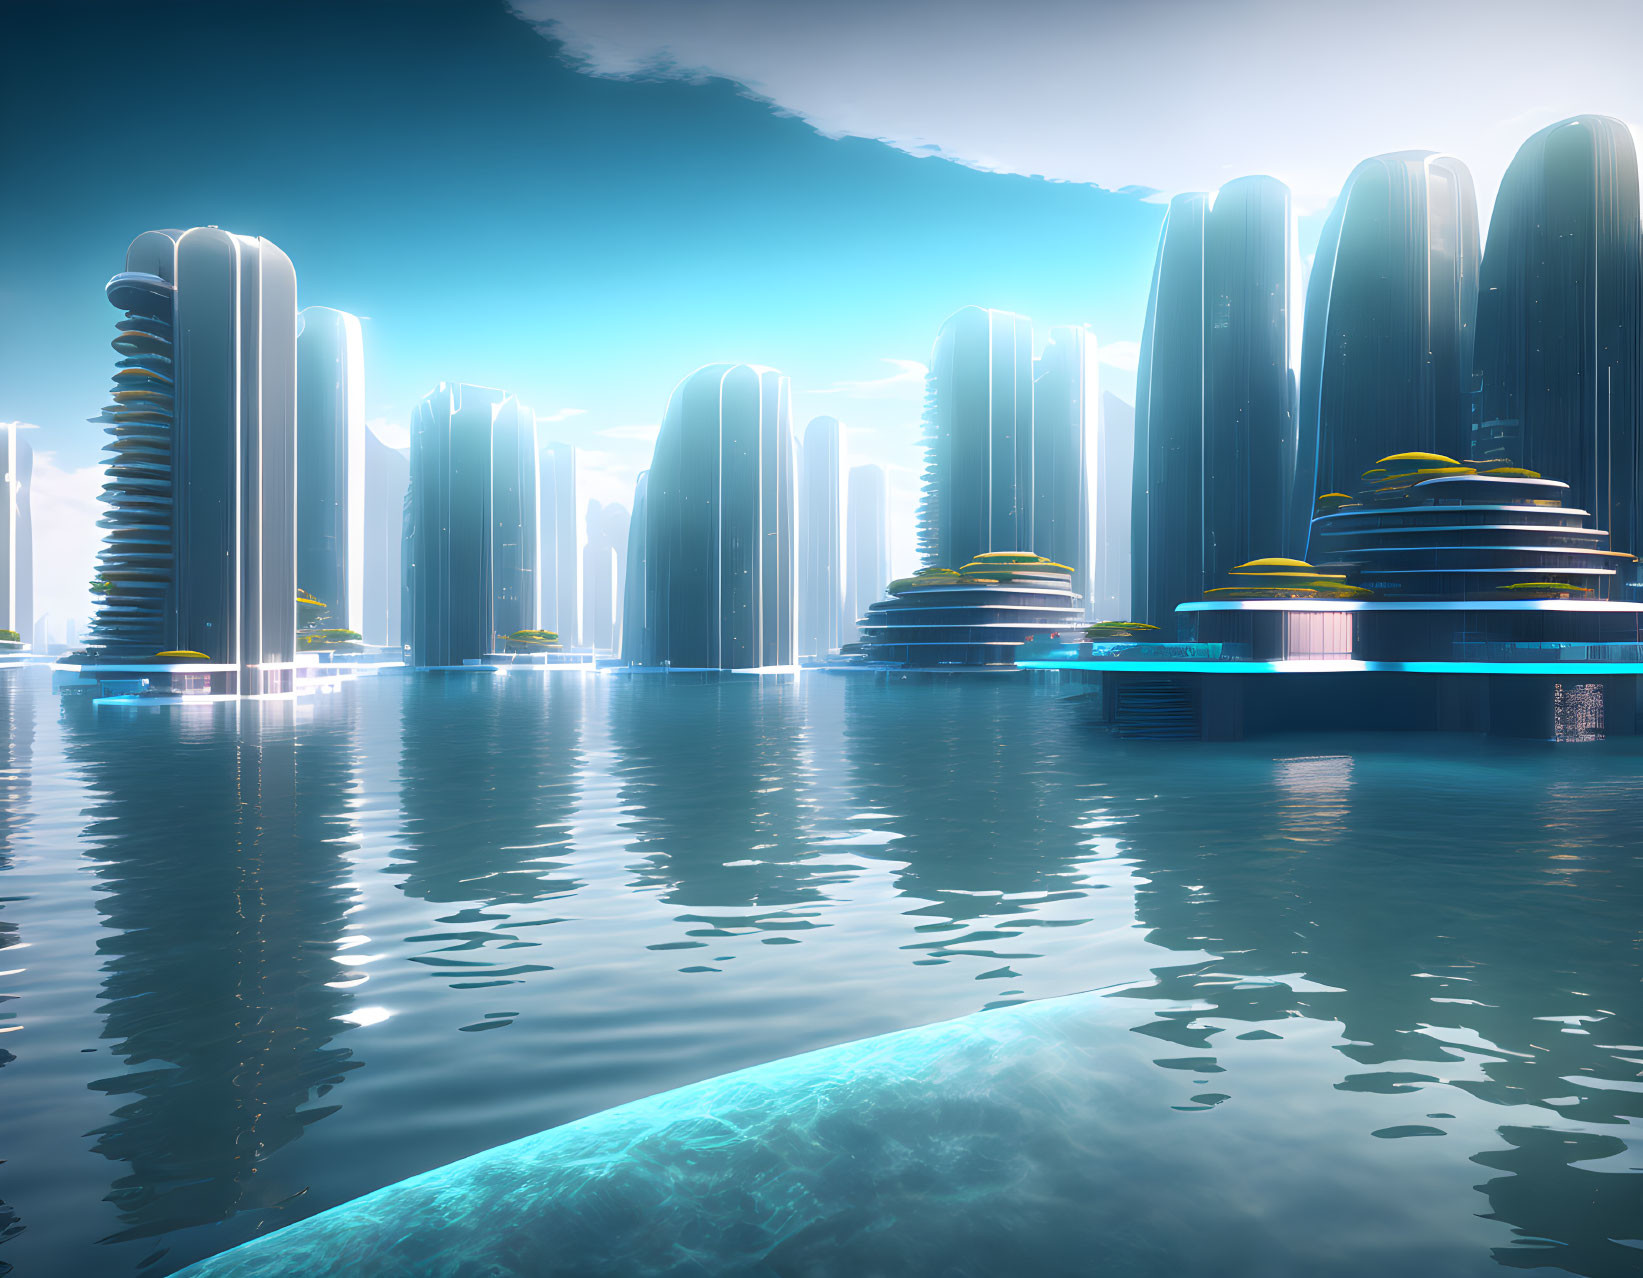 Sleek tall buildings in futuristic cityscape with calm water reflection